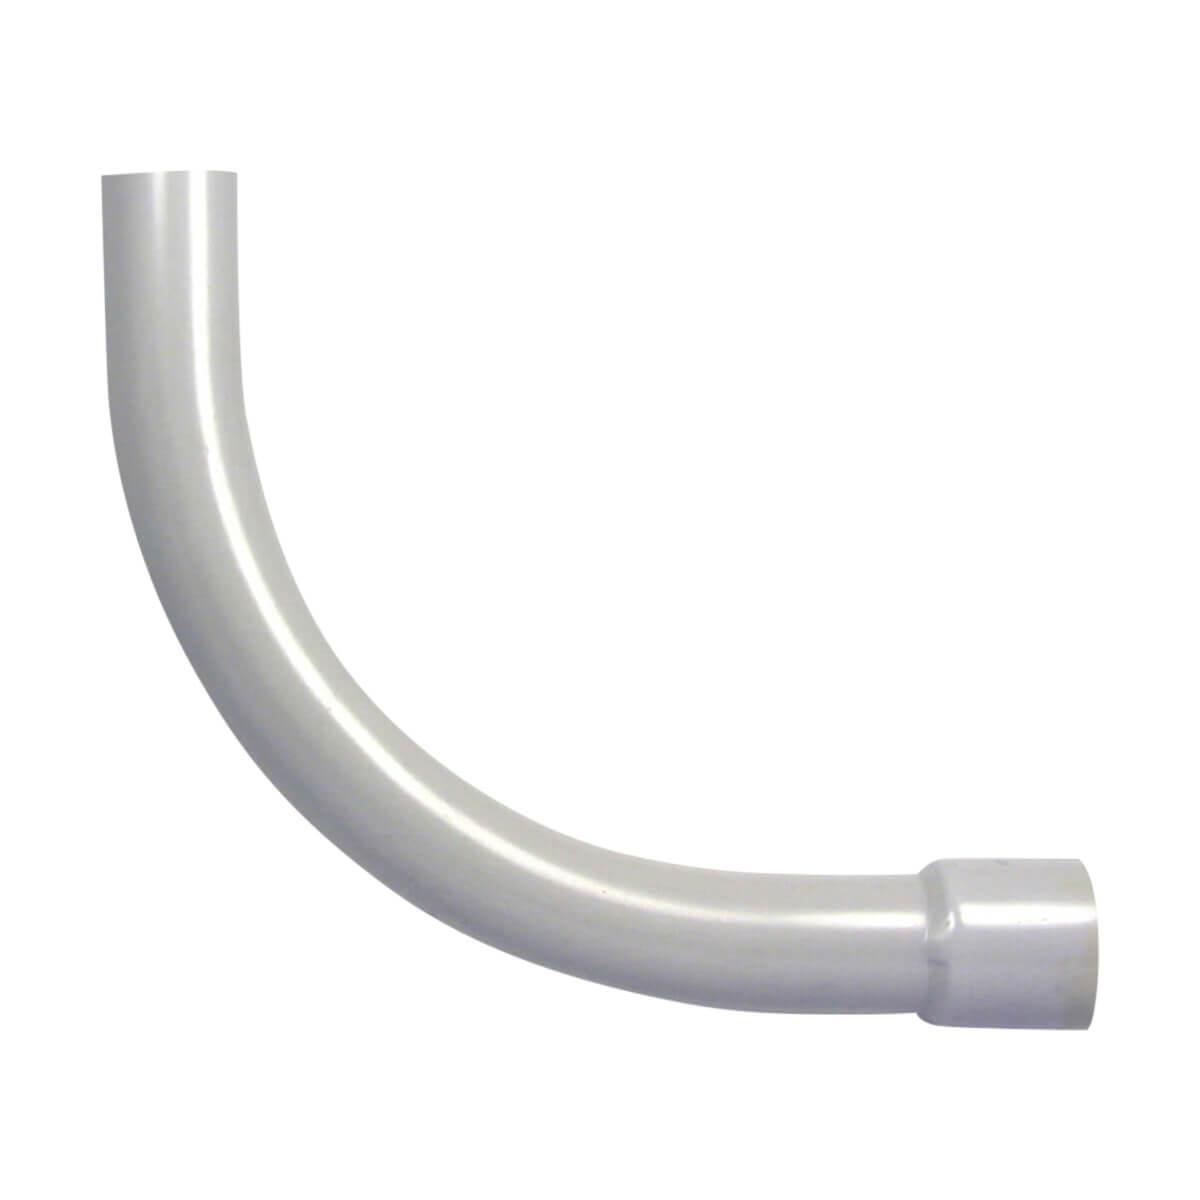 PVC Conduit 90° Elbow - Bell-end - 1-in